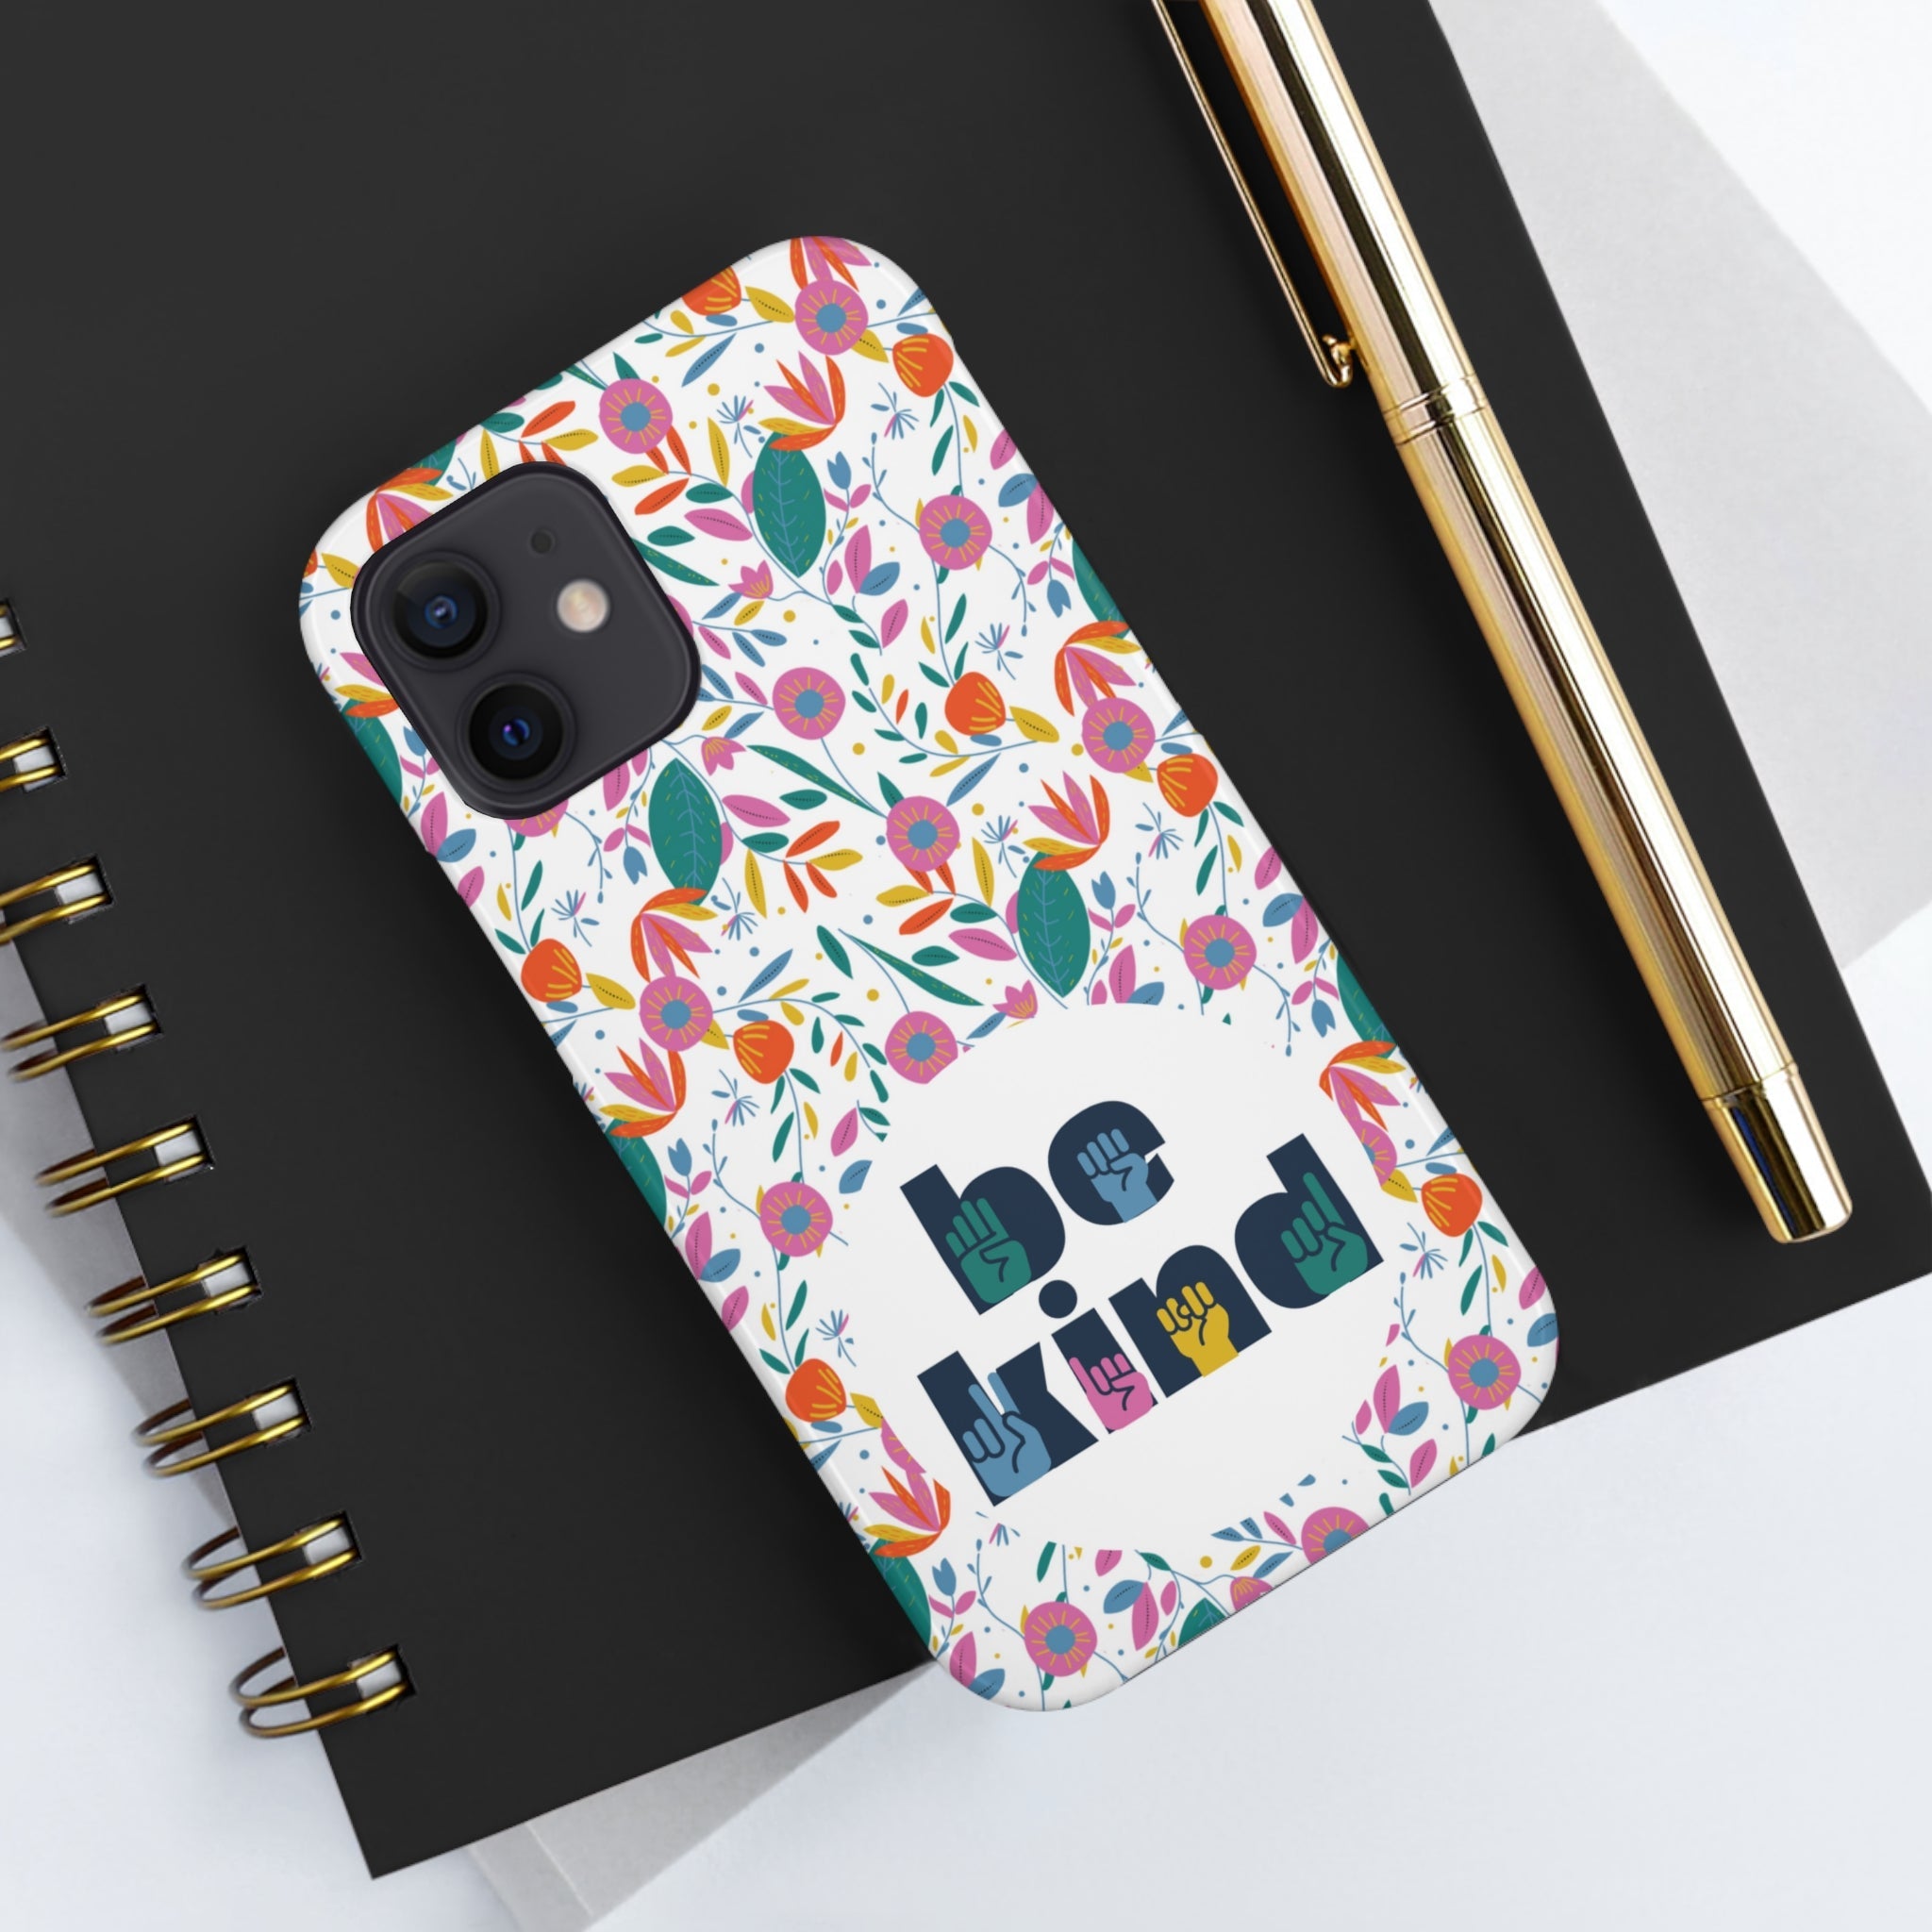 Be Kind Floral iPhone Case - The Kindness Cause